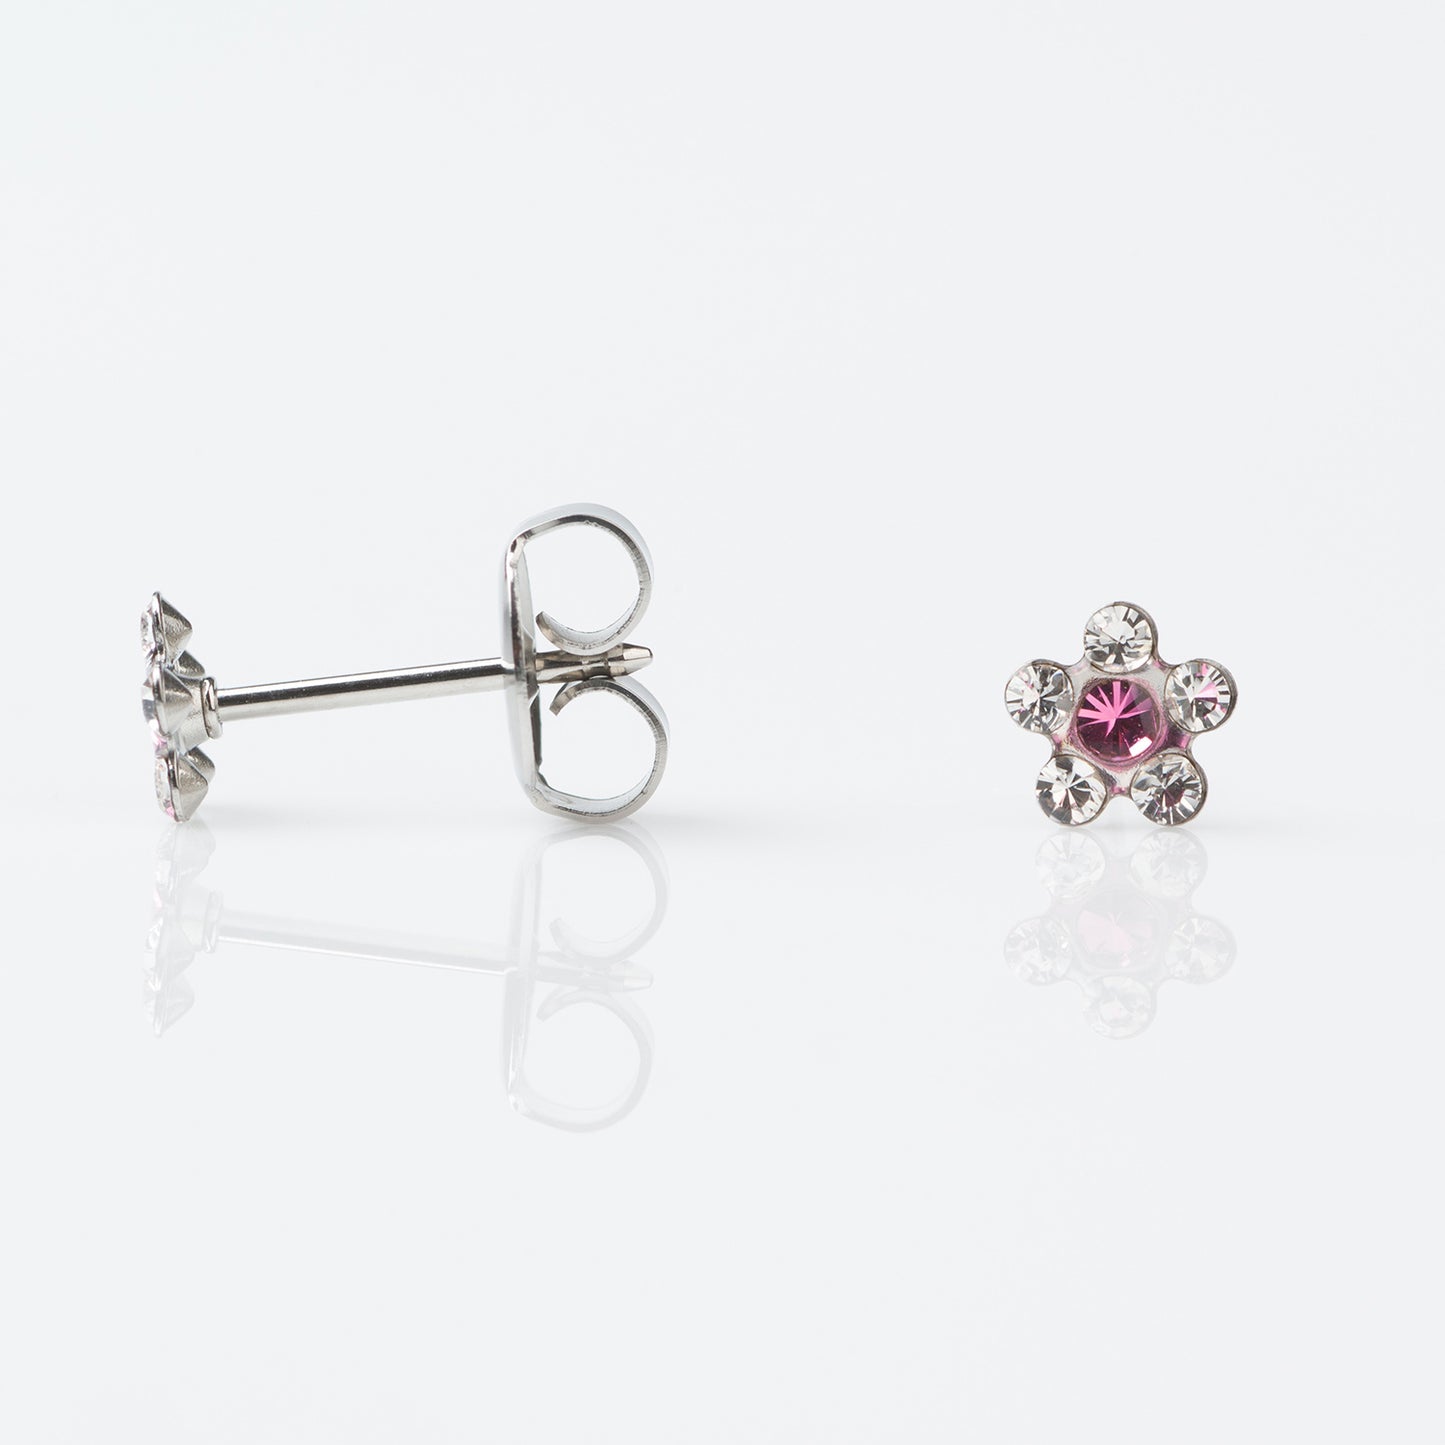 Studex Sensitive Stainless Steel Daisy Crystal – Rose